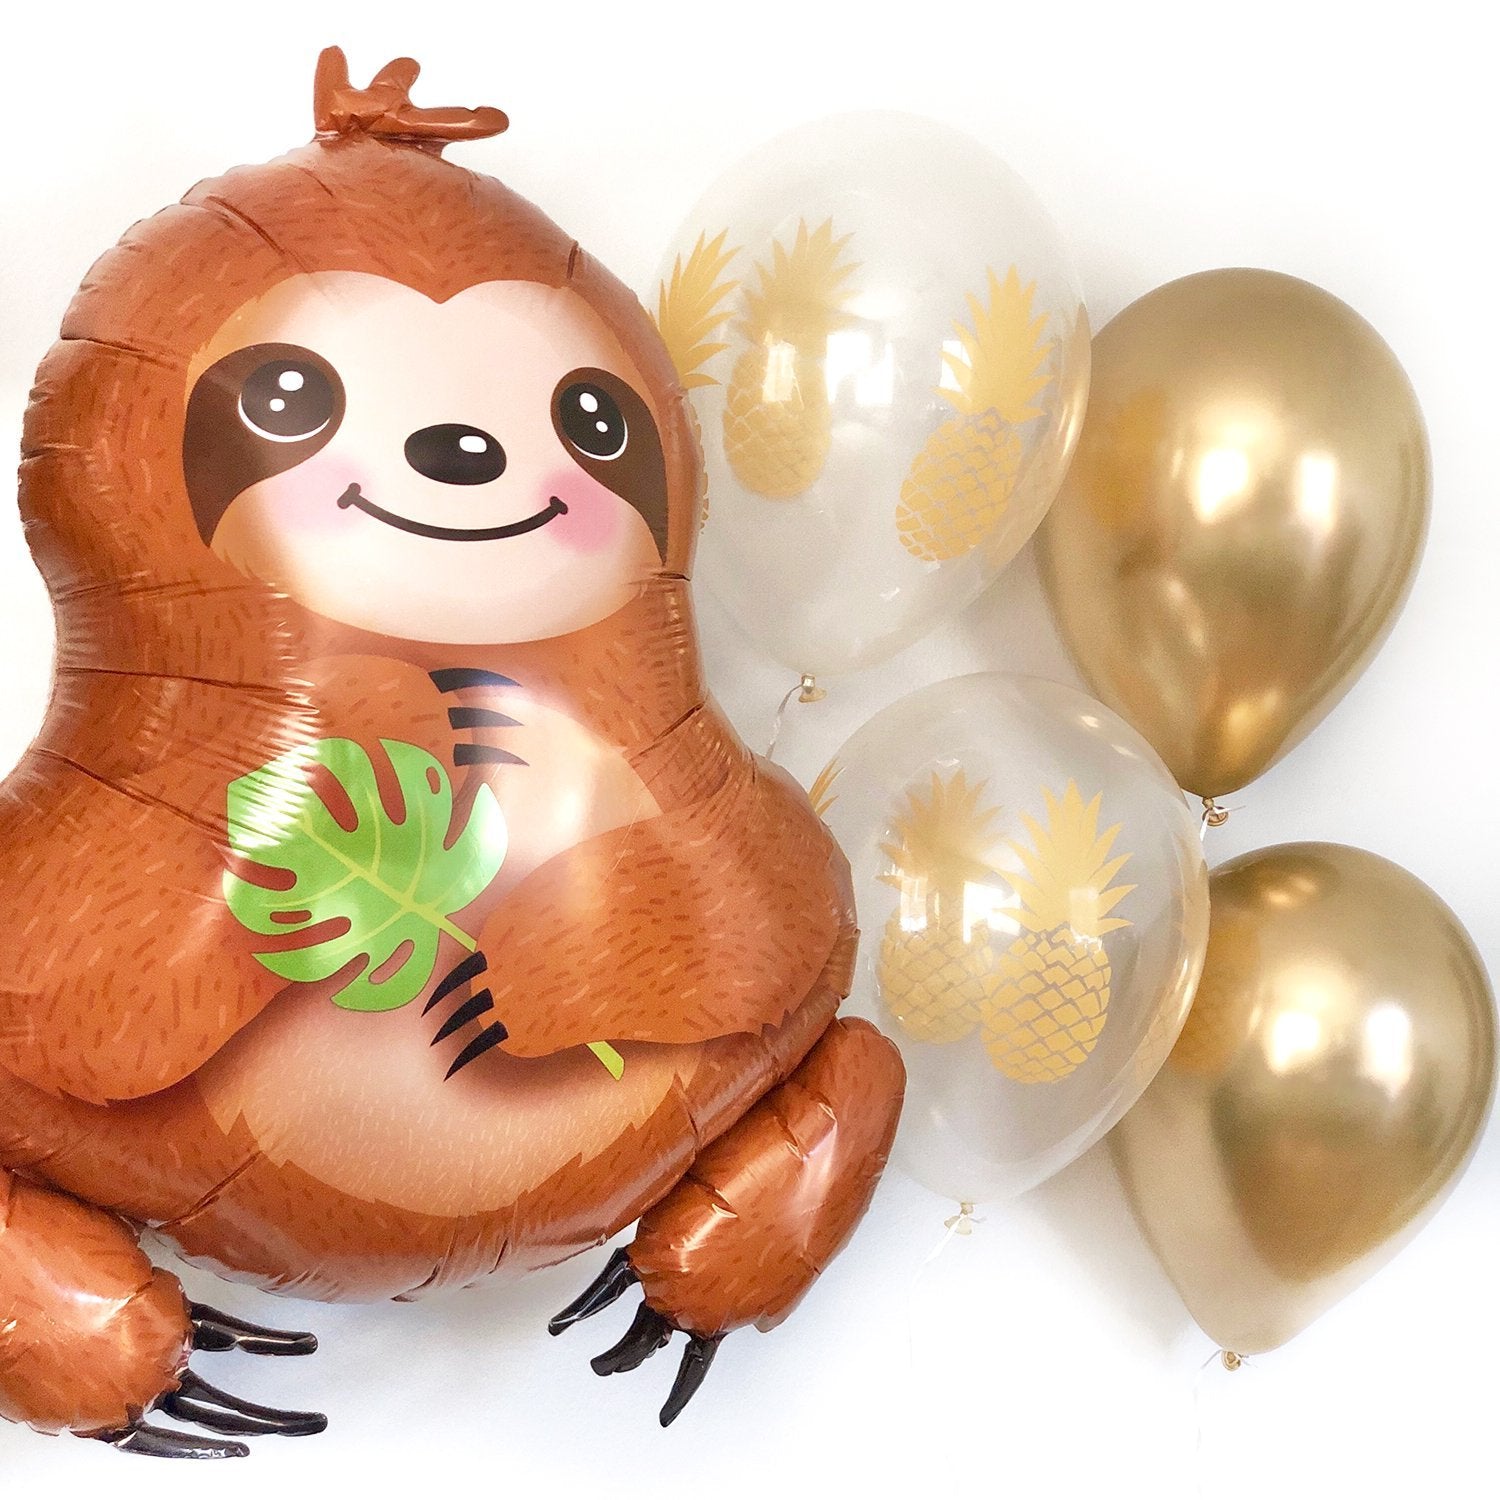 Baby Sloth and Golden Pineapple Balloon Set - Pretty Collected